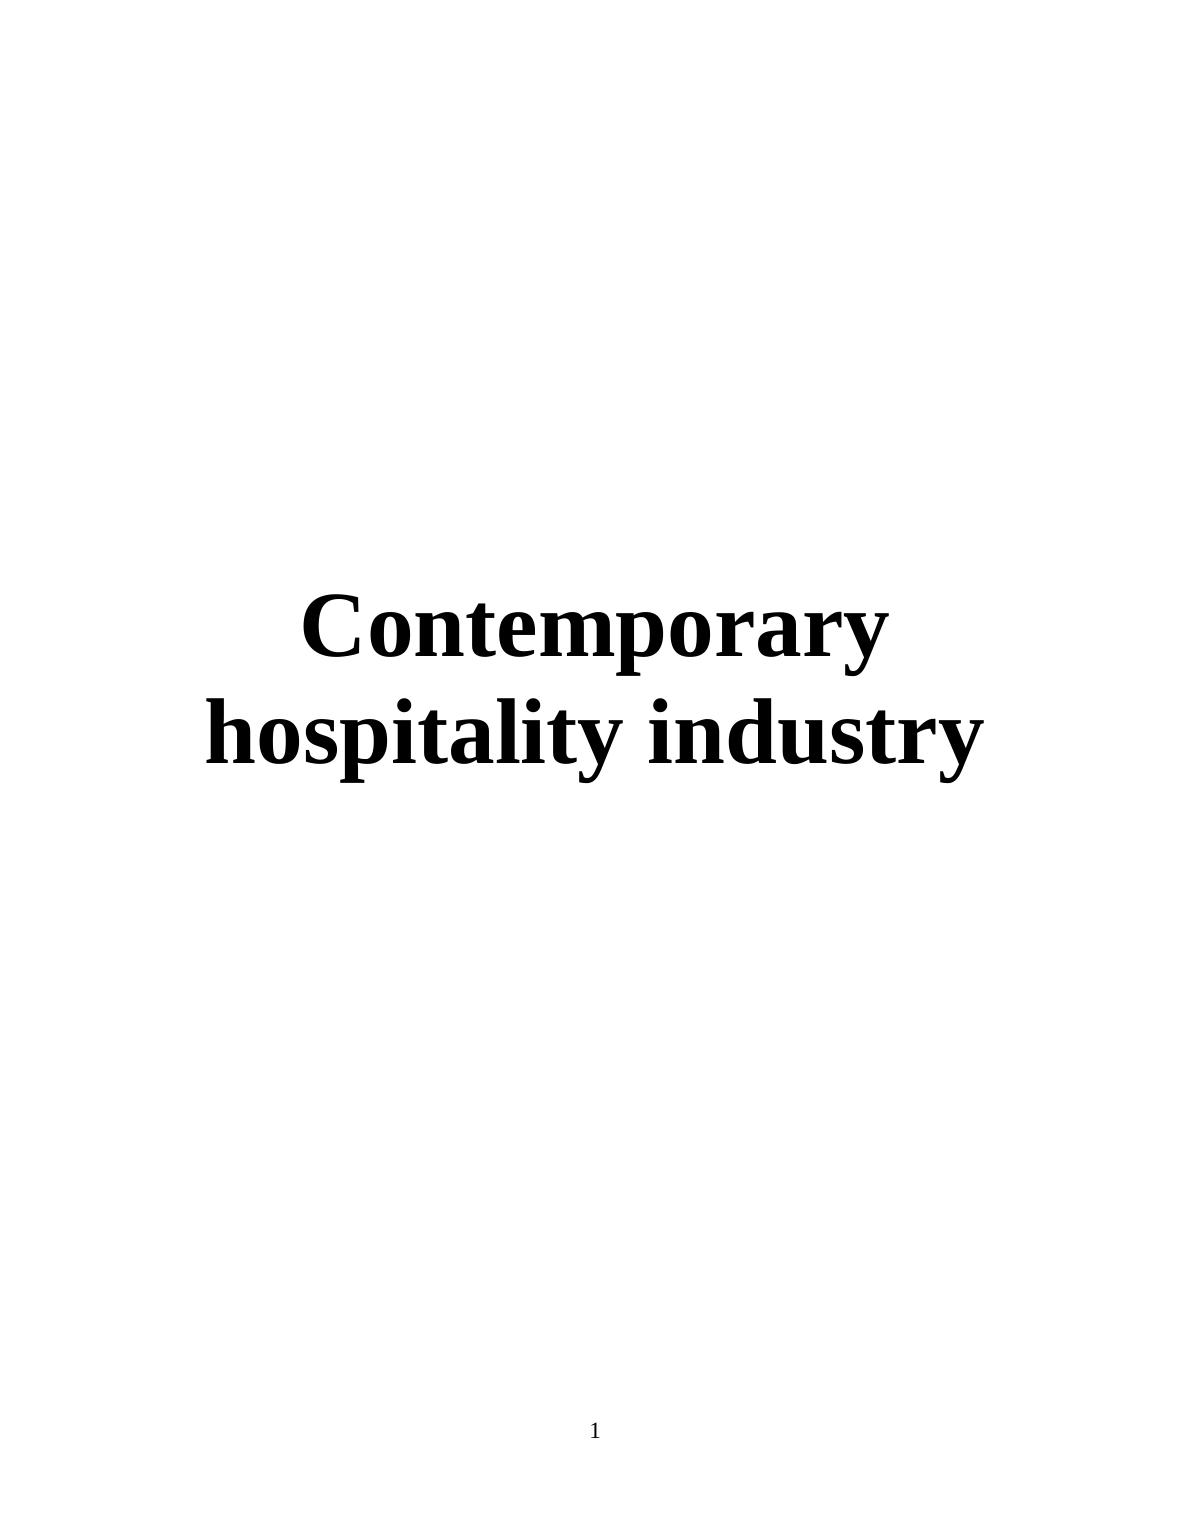 Contemporary Hospitality Industry: Types of Business, Operational Departments, and Economic Contribution_1